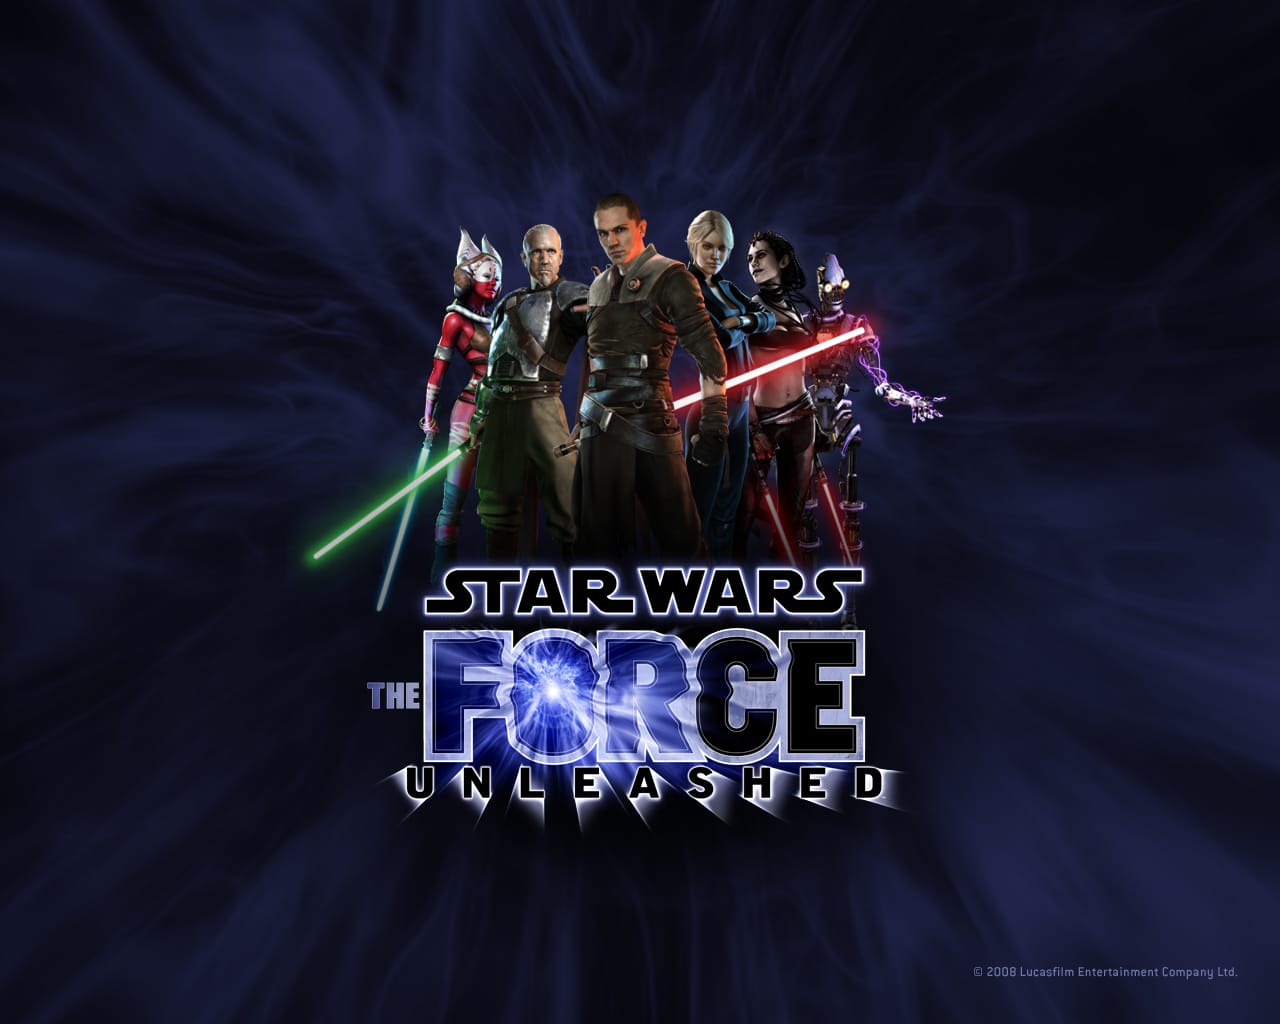  The Force Unleashed wallpapers.